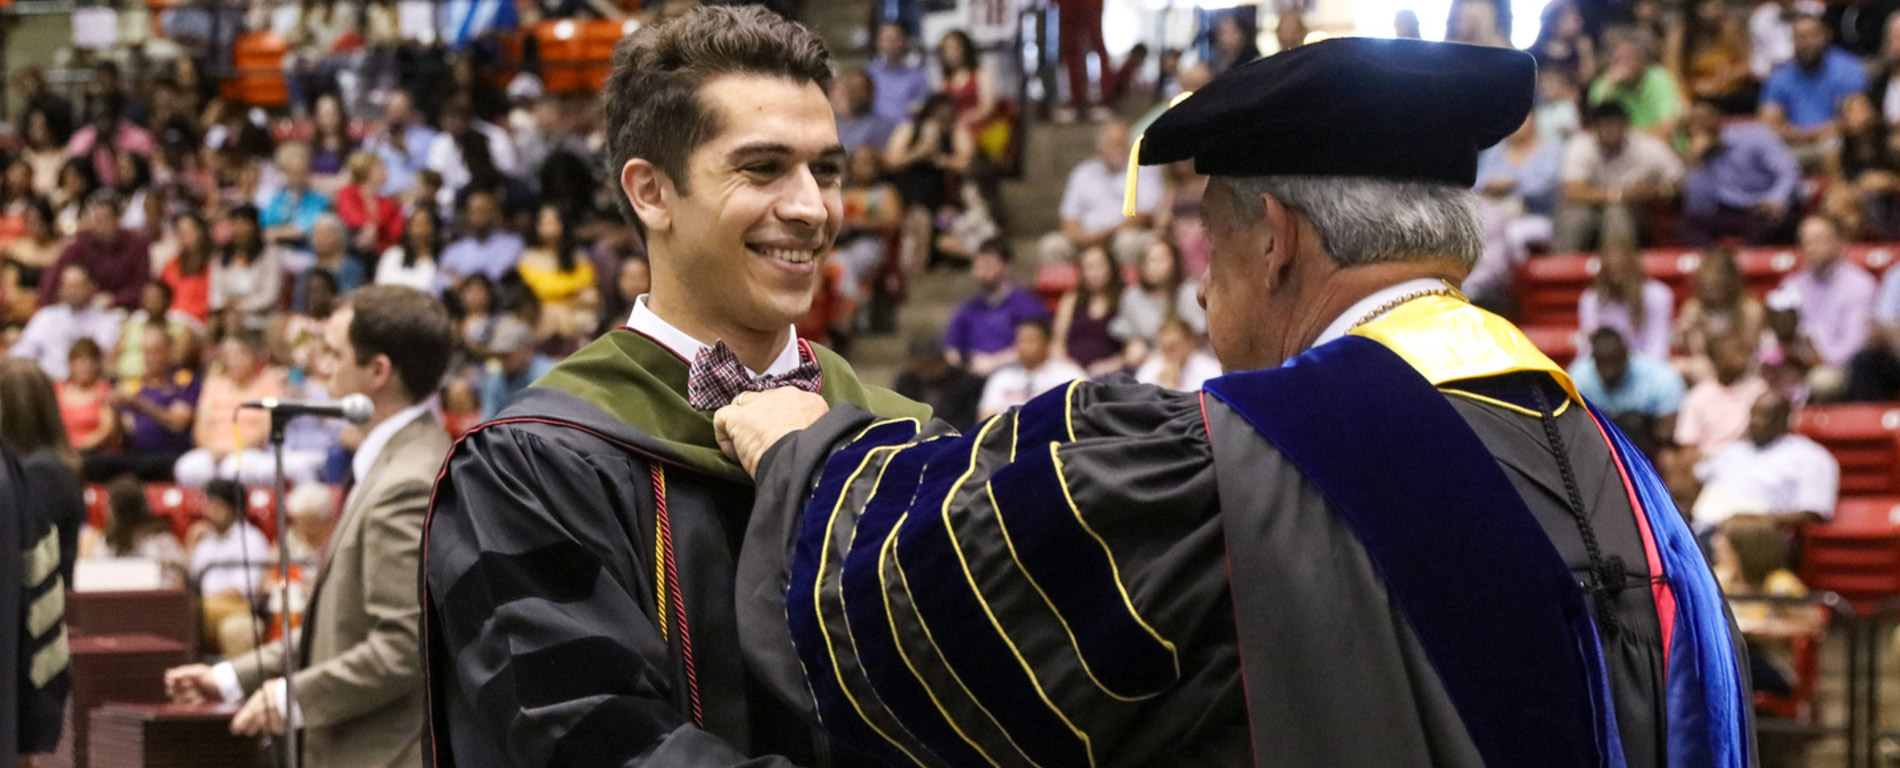 Doctoral Graduate receiving diploma at commencement